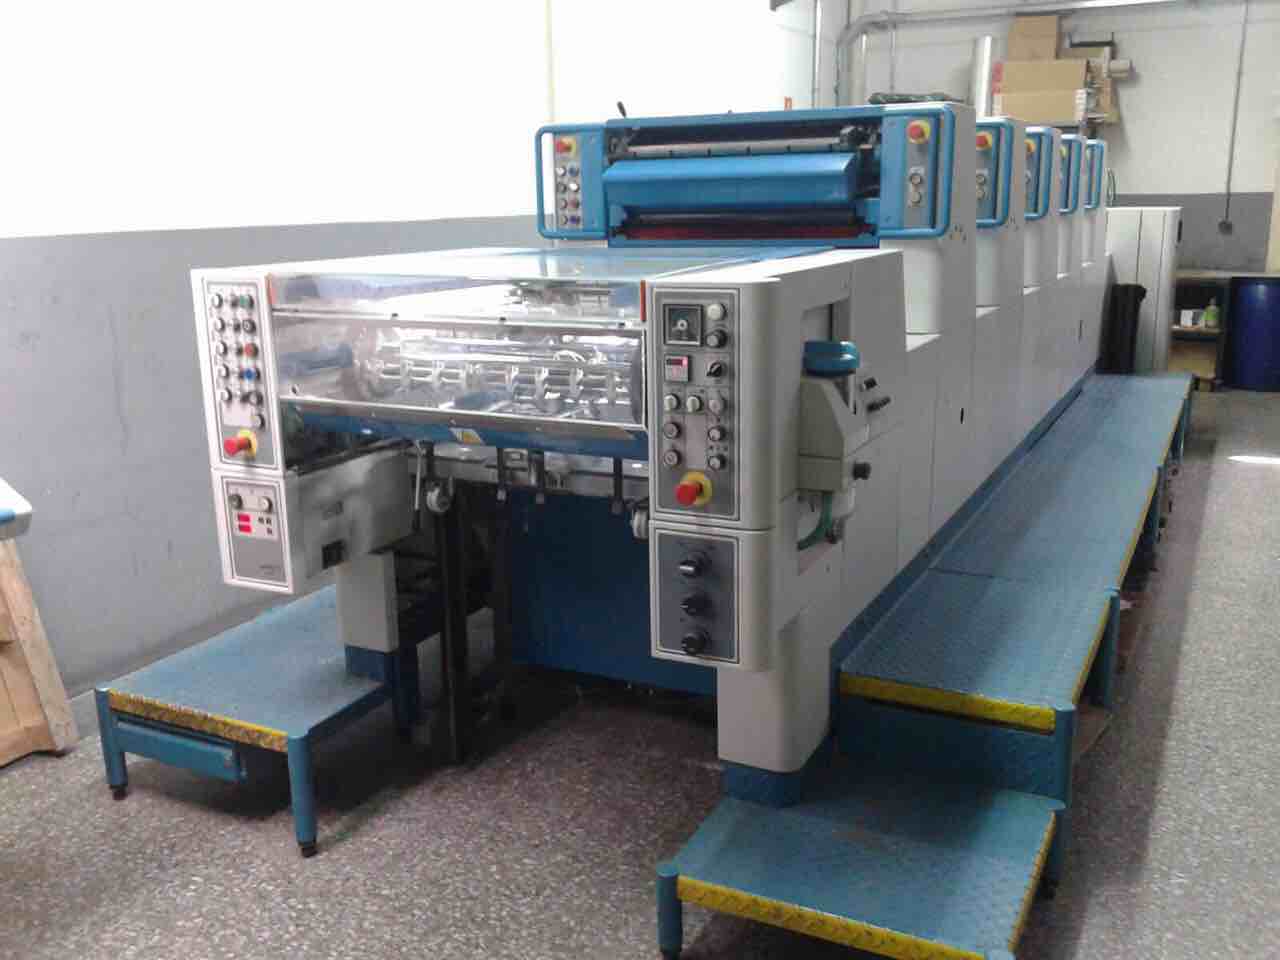 Adast Polly-566-PH Sheet Fed / Offset Used Machinery for sale